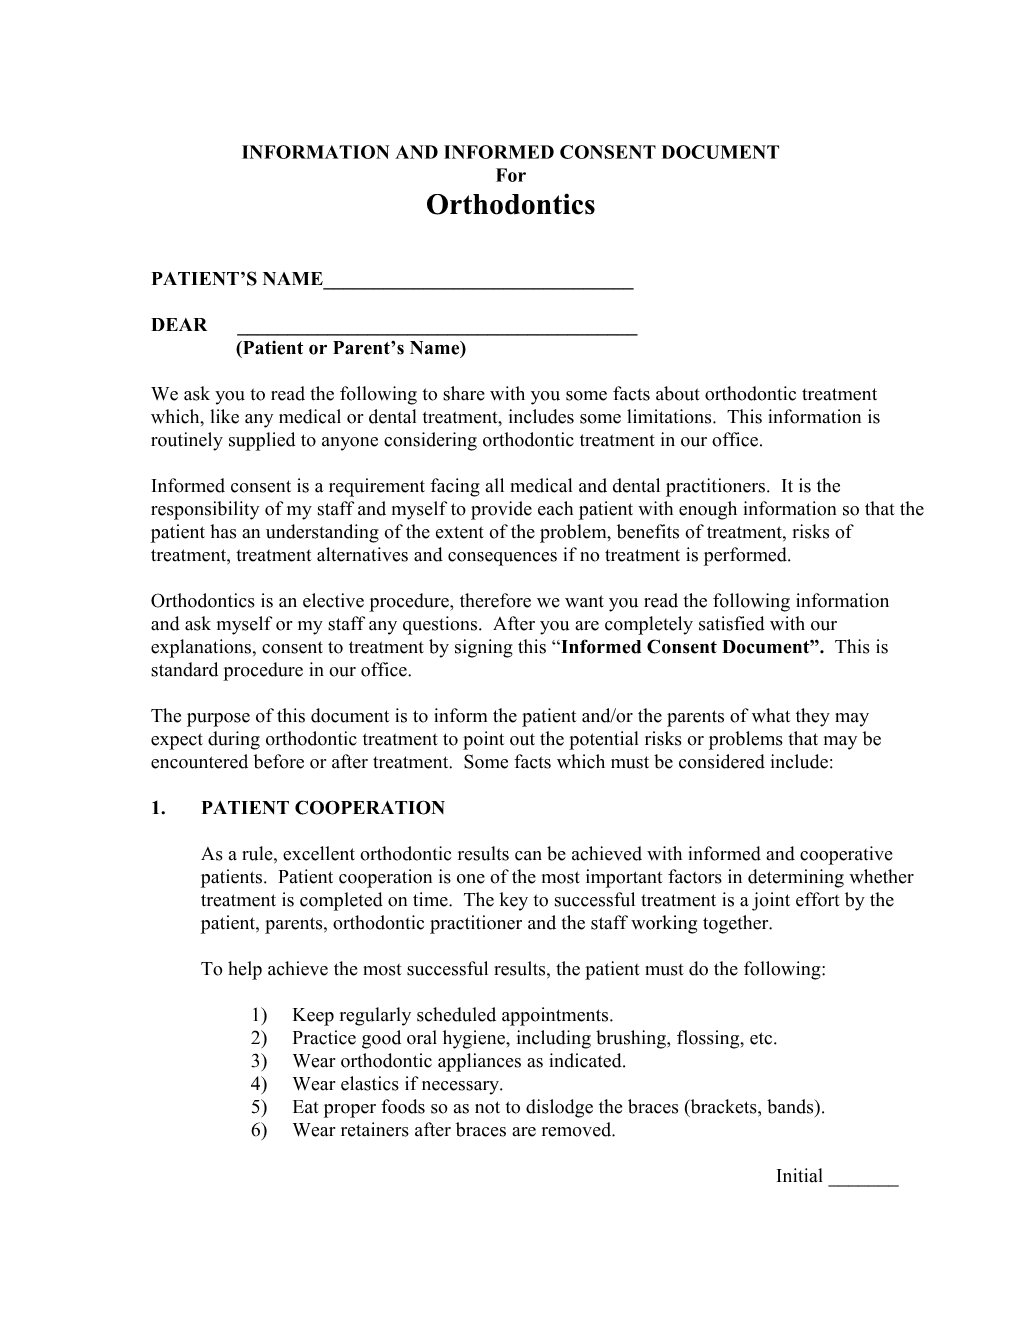 Information and Informed Consent Document